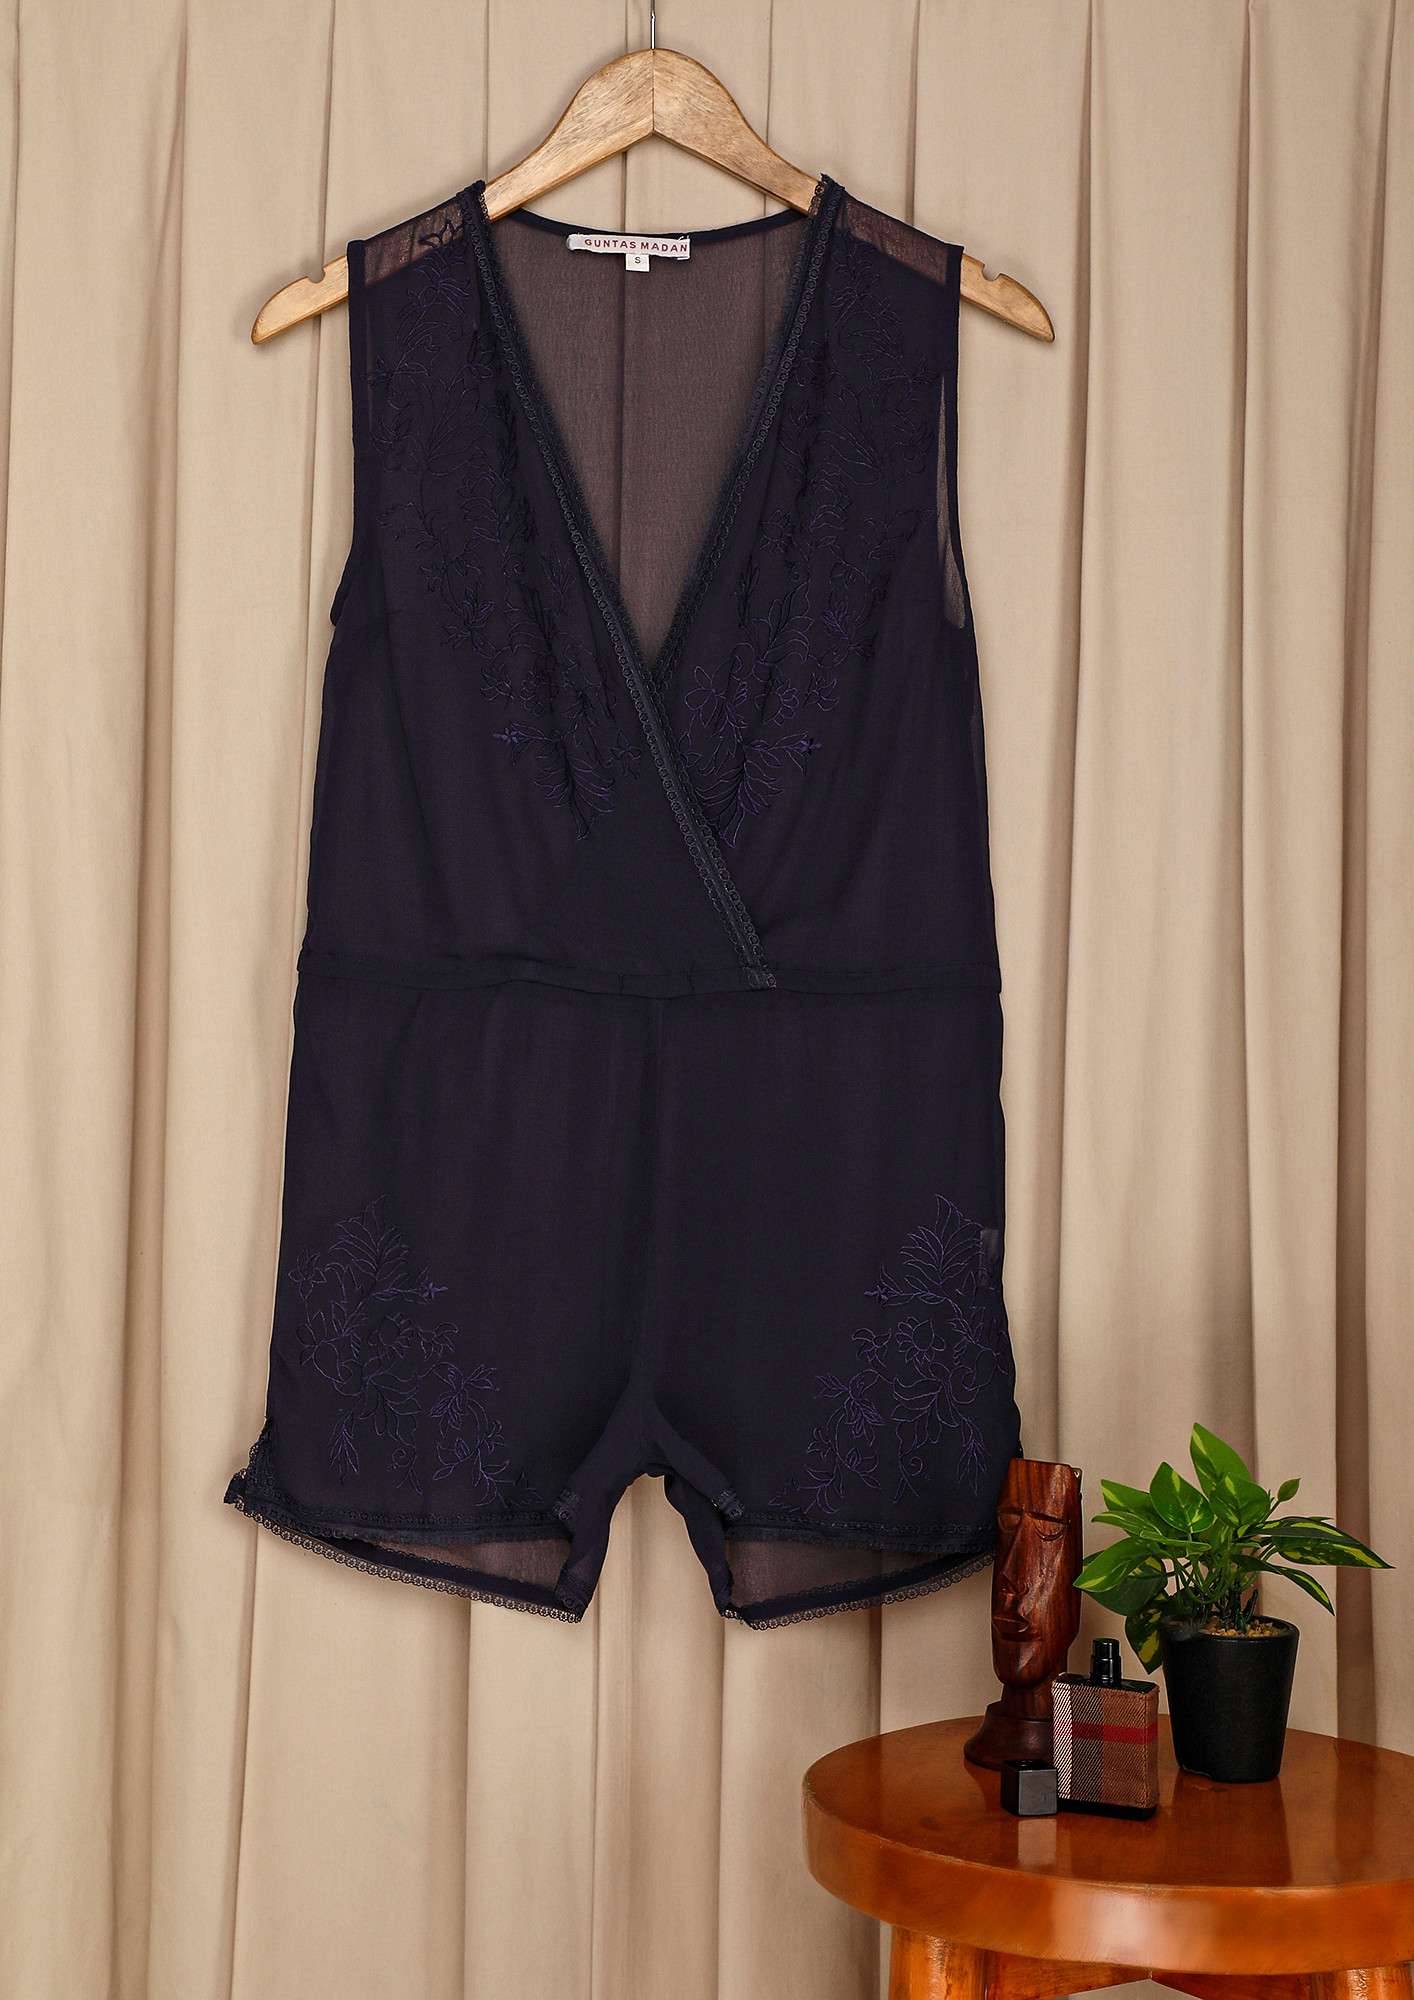 IN A BLACK THREAD DETAIL POLYESTER PLAYSUIT